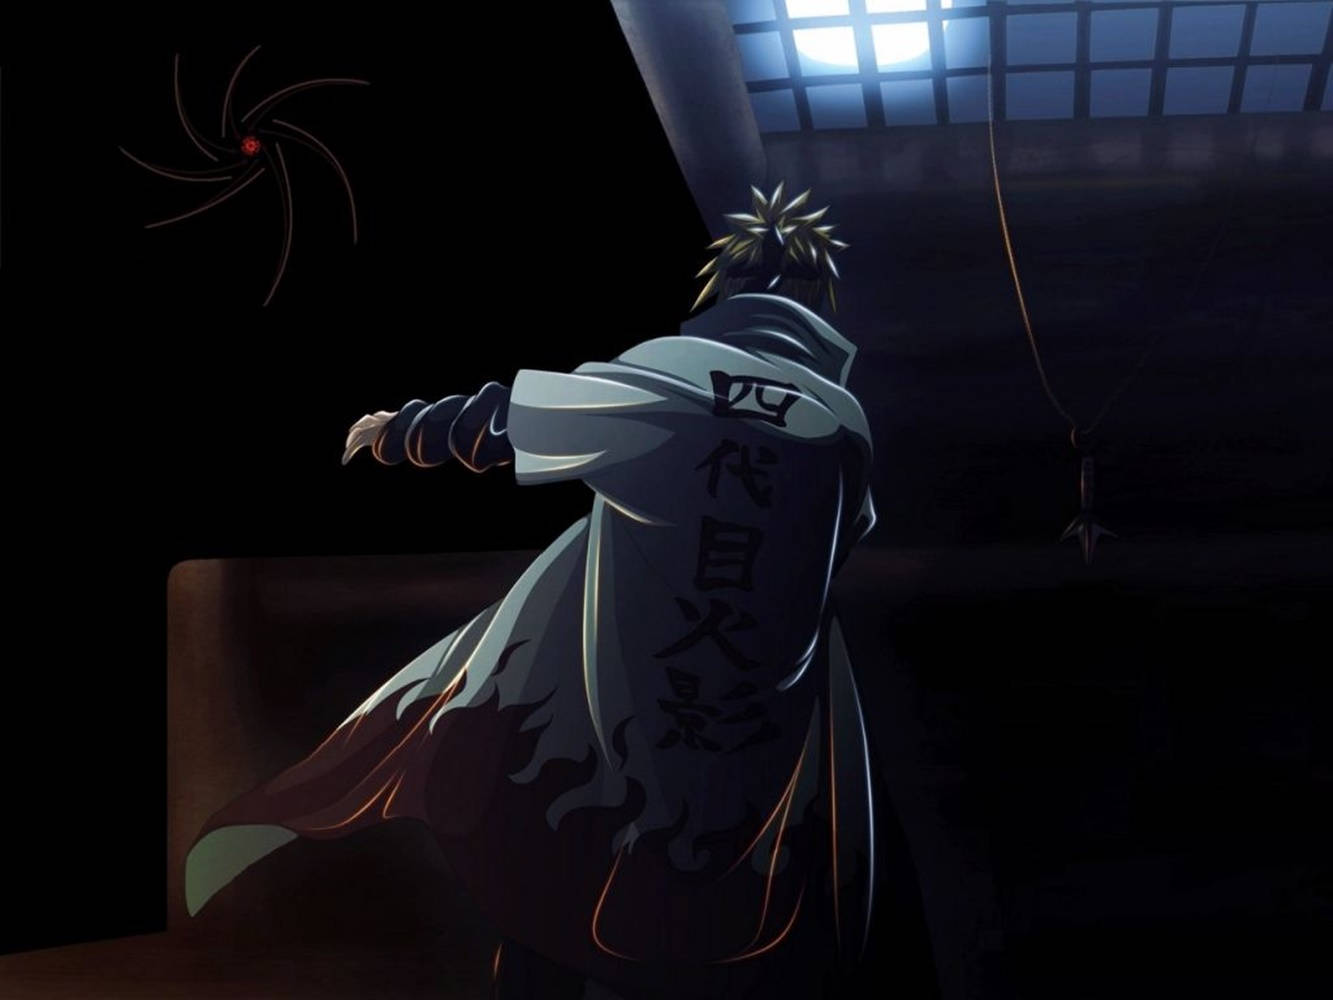 Epic Showdown Between The Fourth Hokage Minato Namikaze And Obito With His Mask; A Pivotal Point In Naruto